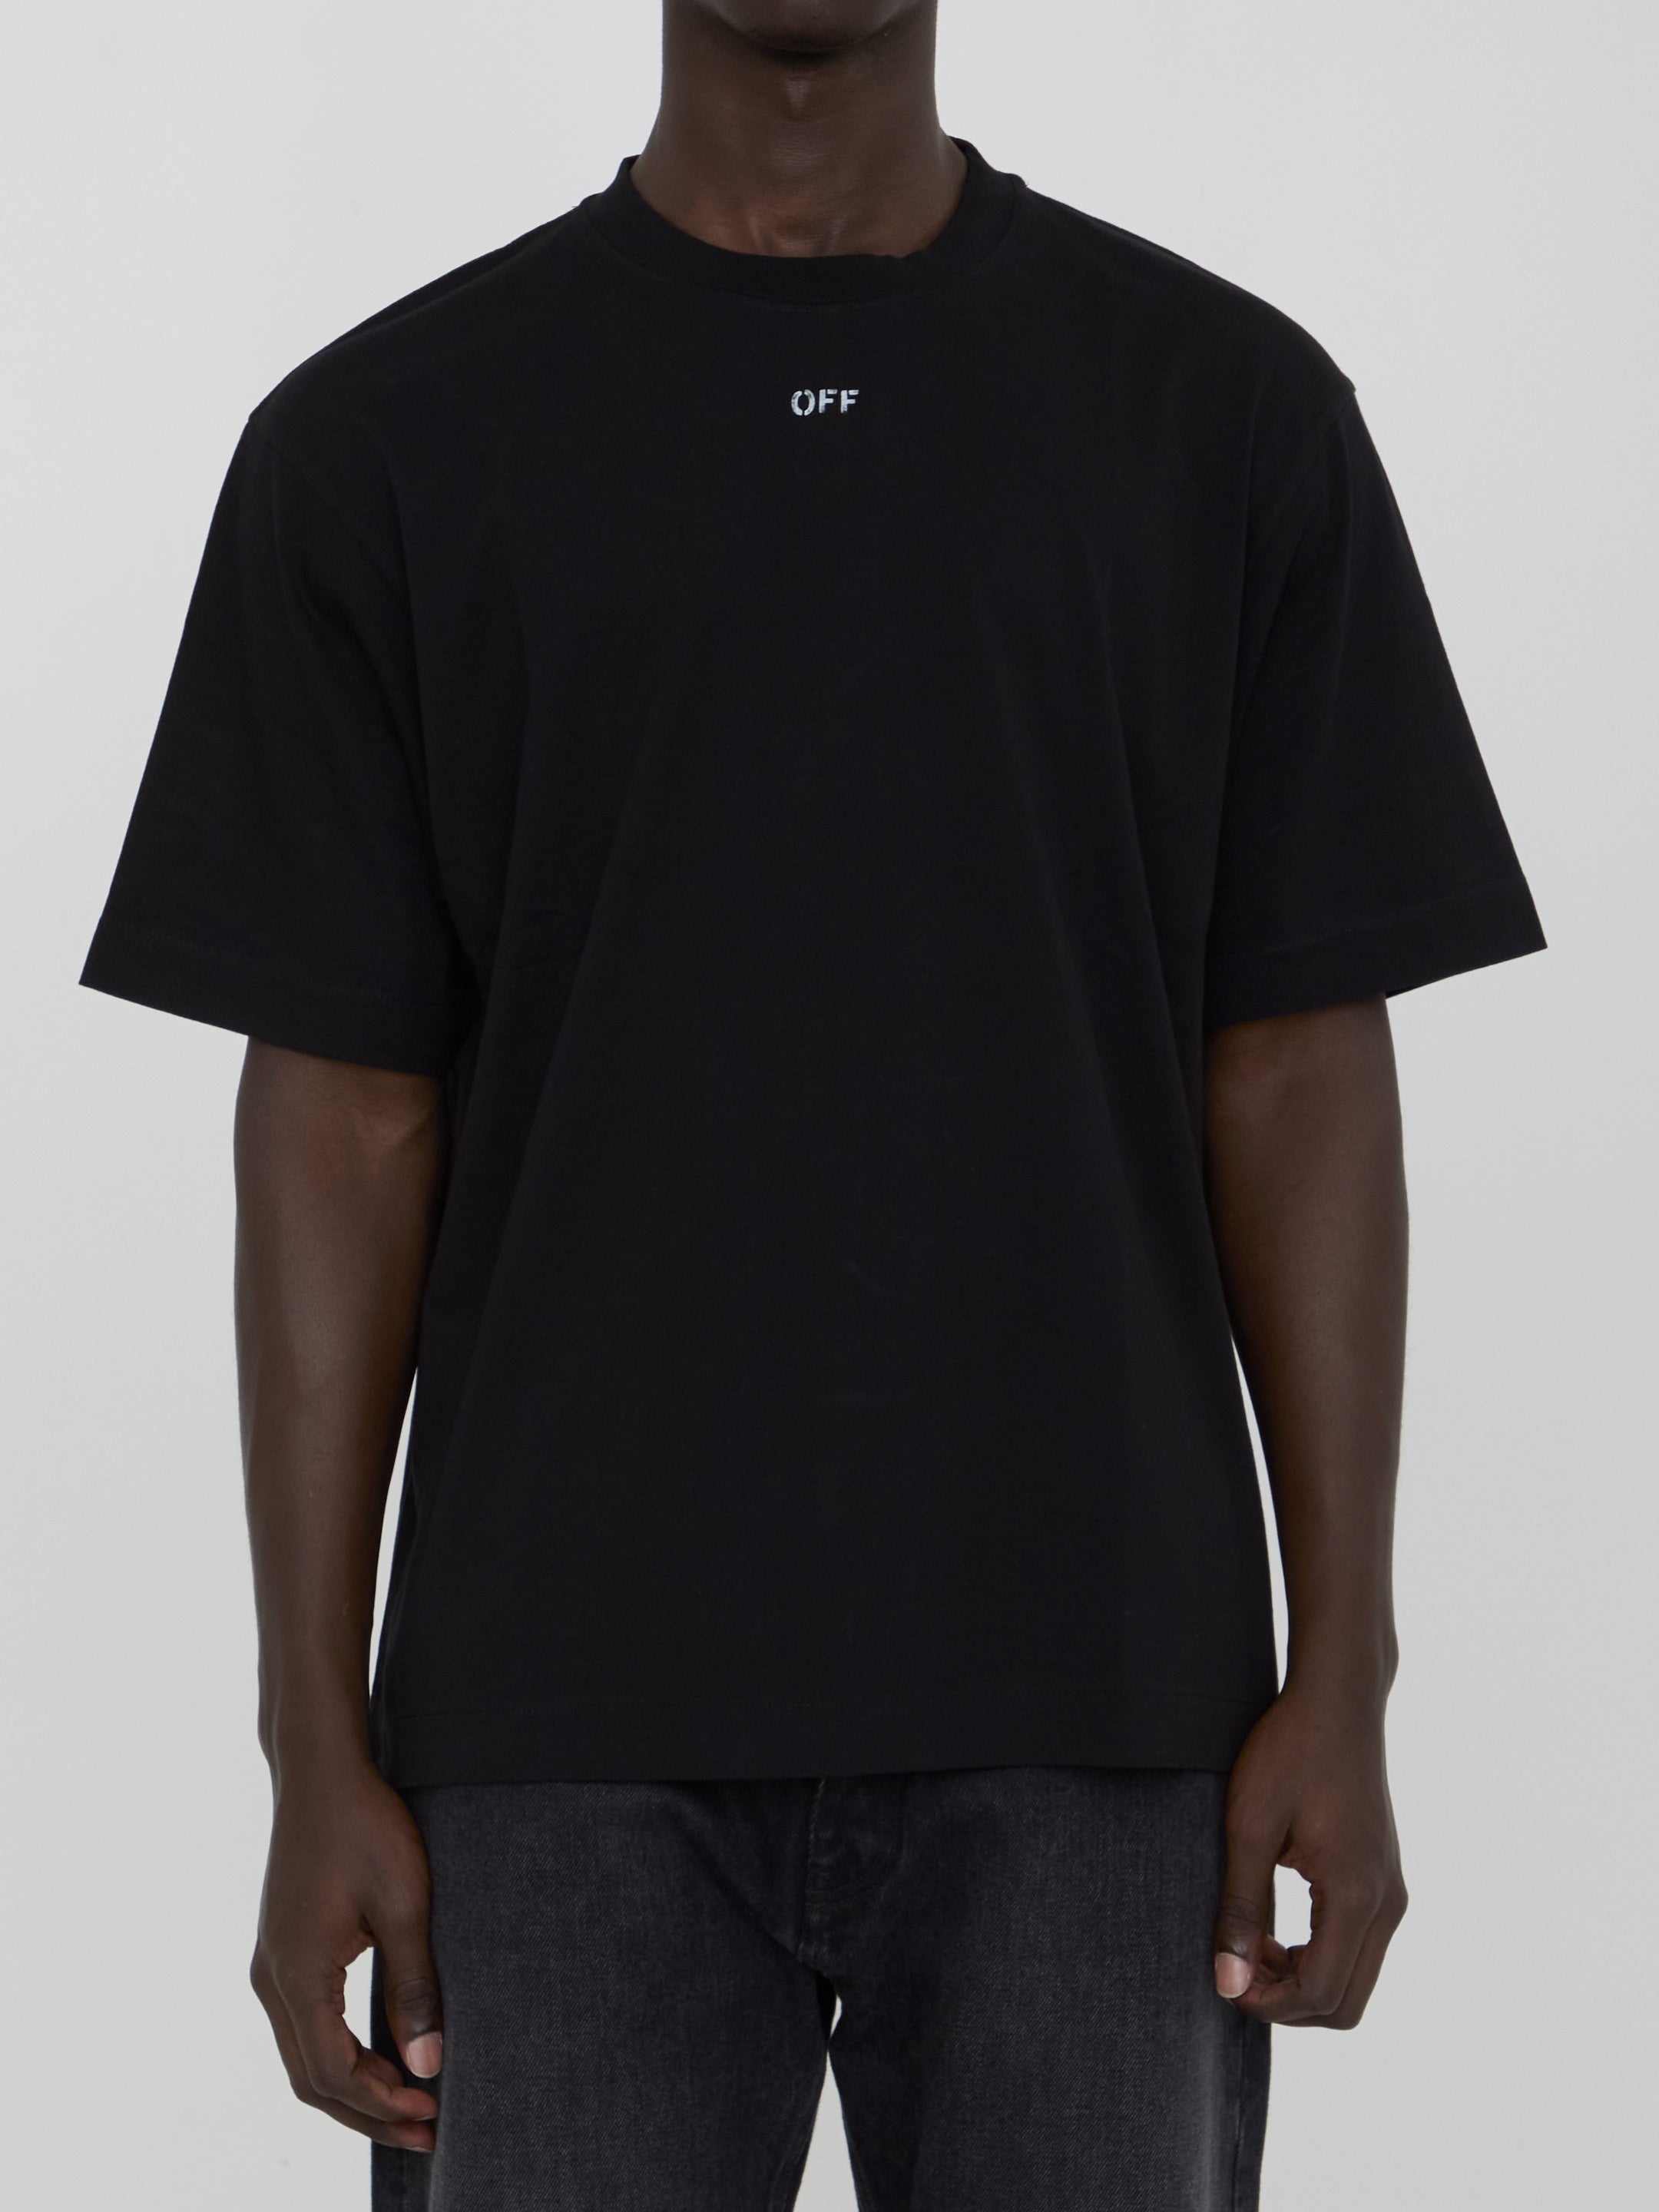 OFF-WHITE-OUTLET-SALE-Off-Stamp-Skate-t-shirt-Shirts-L-BLACK-ARCHIVE-COLLECTION.jpg